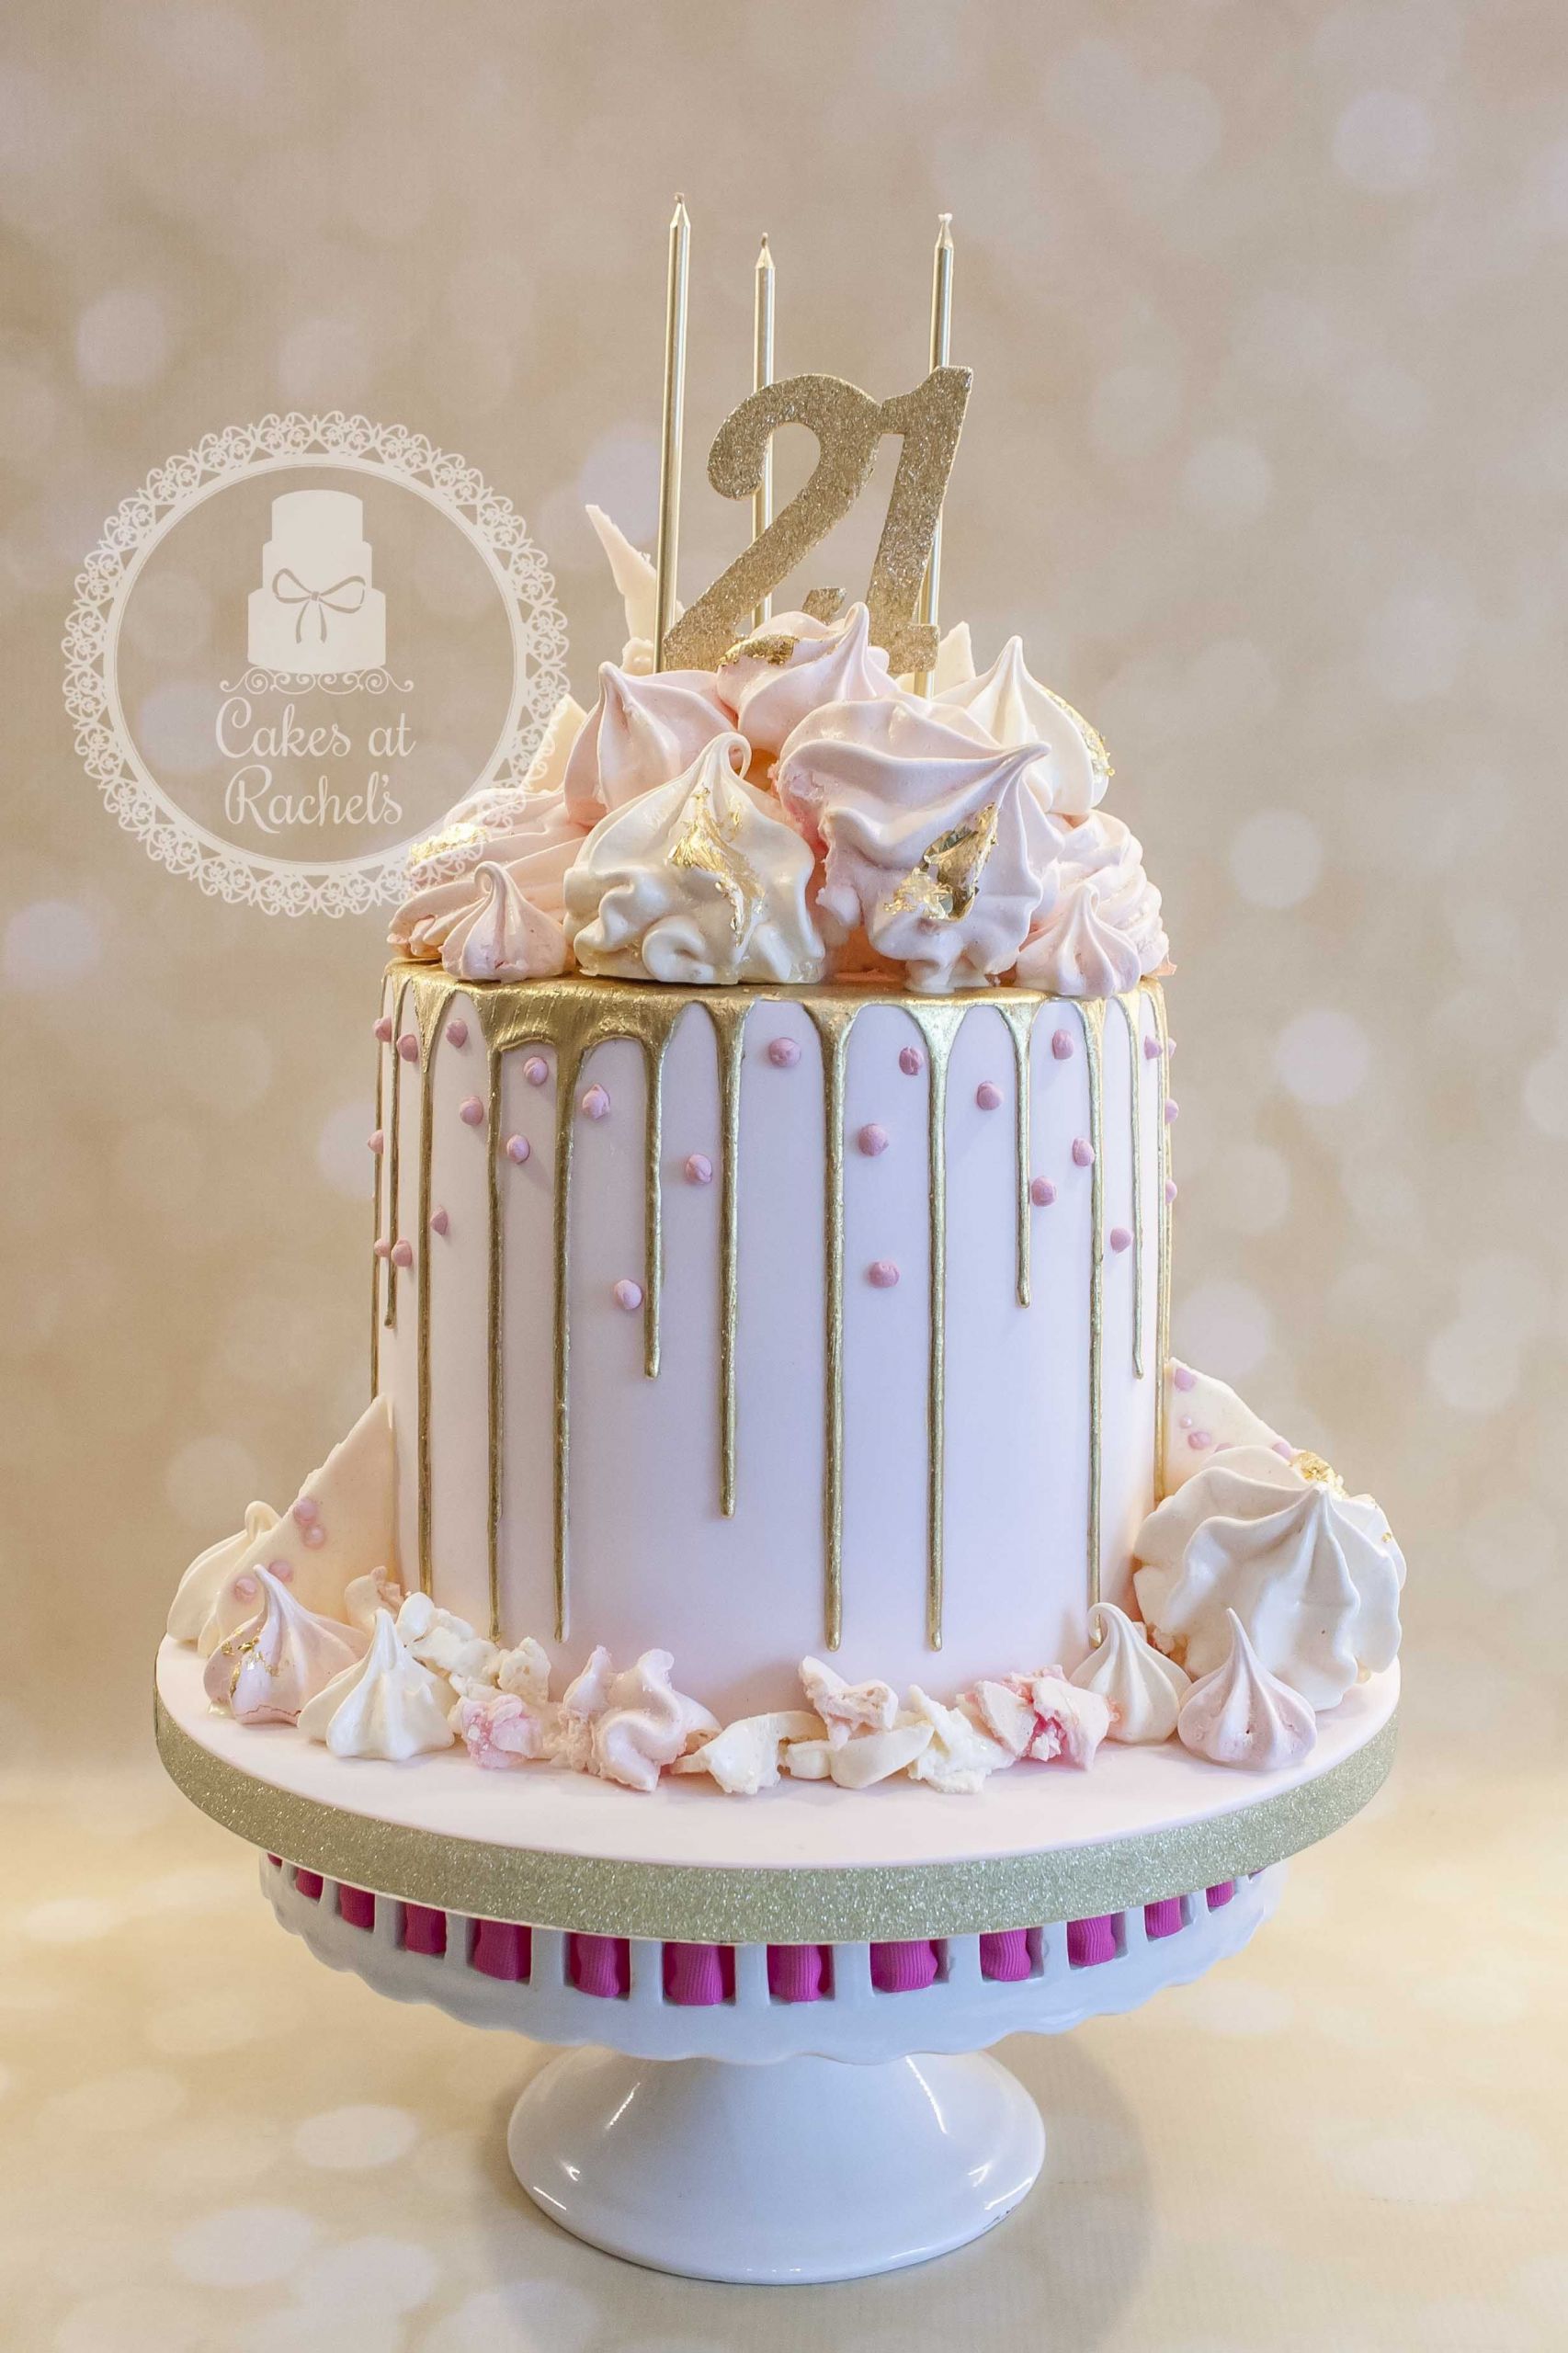 21st Birthday Cake Ideas For Her
 Pastel pink and gold drip cake for Francesca s 21st